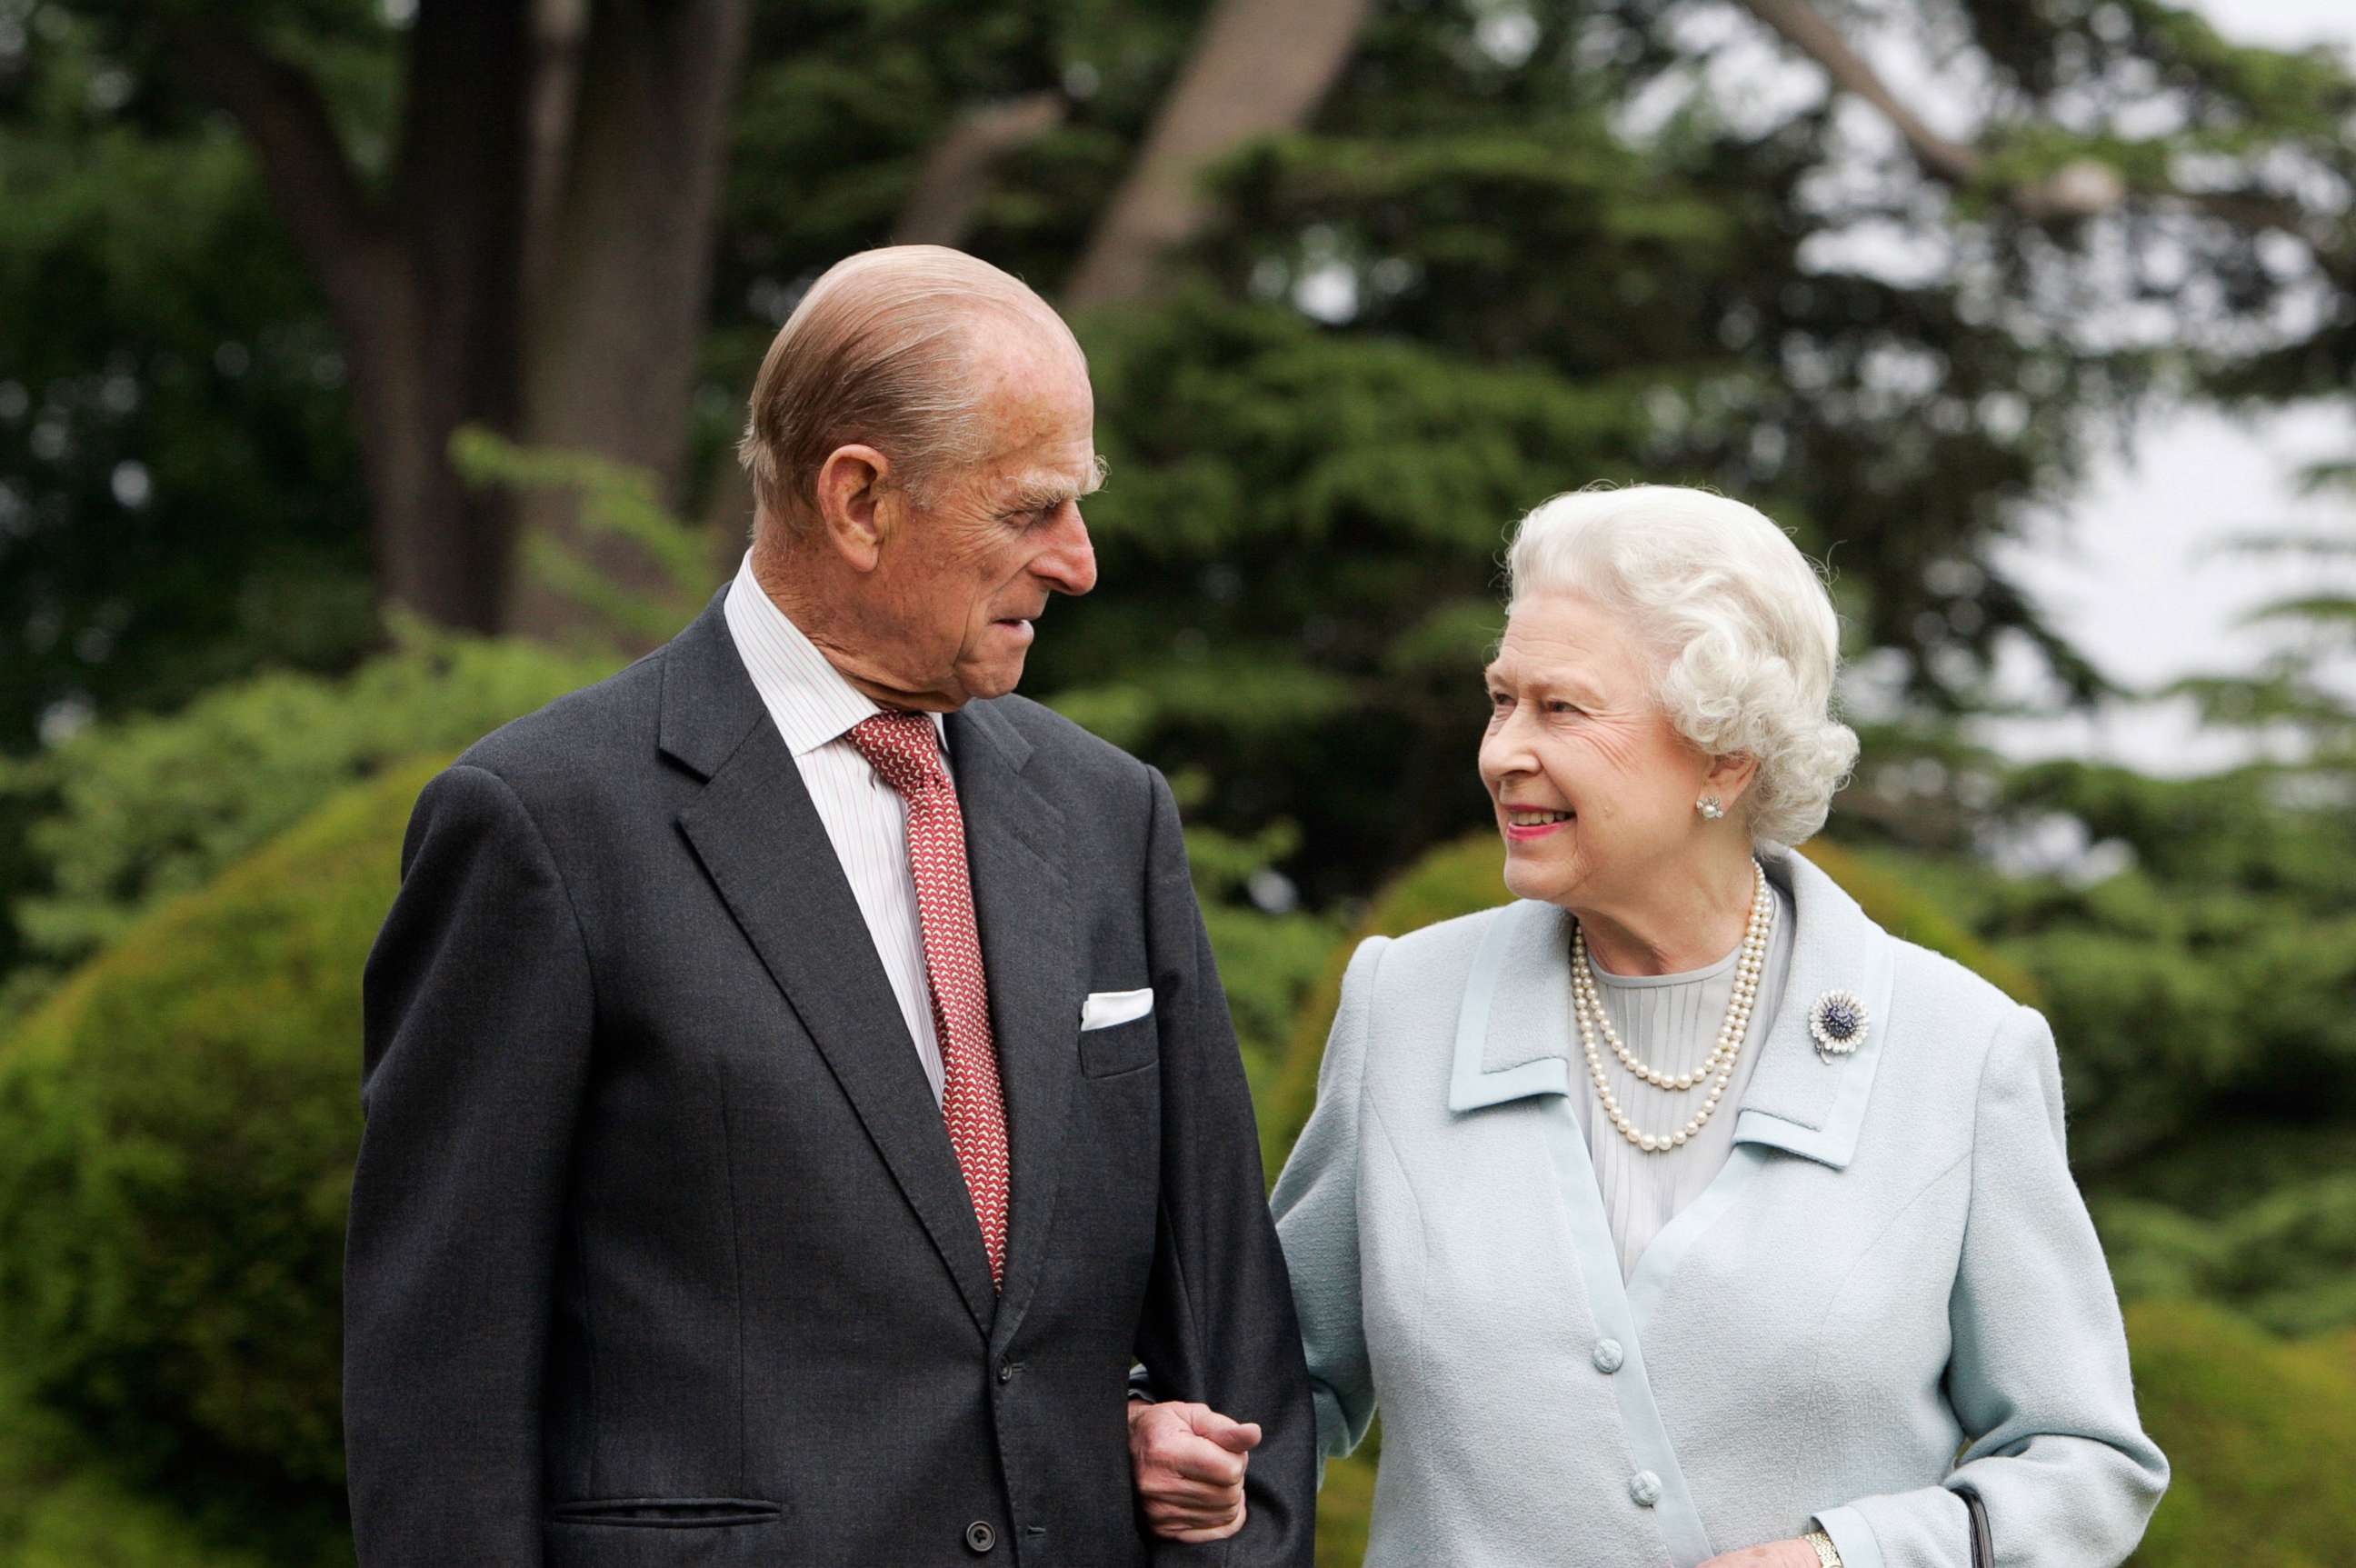 PHOTO: In this image, made available Nov. 18, 2007, Queen Elizabeth II and Prince Philip, The Duke of Edinburgh re-visit Broadlands, in Hampshire, England, to mark their Diamond Wedding Anniversary on Nov. 20.